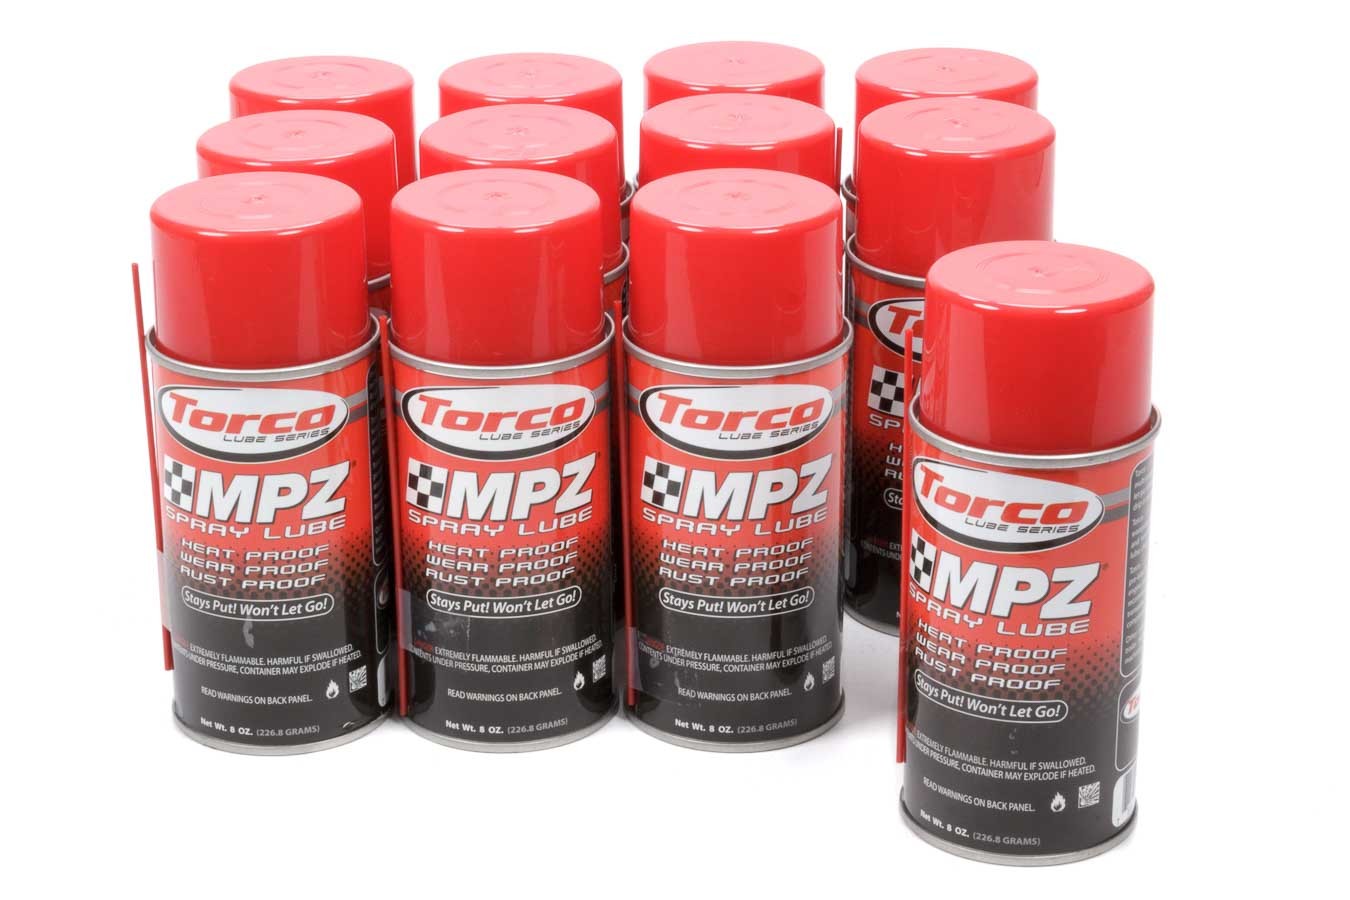 Torco Oil, MPZ Spray Lube Case 12 x 8oz. Can